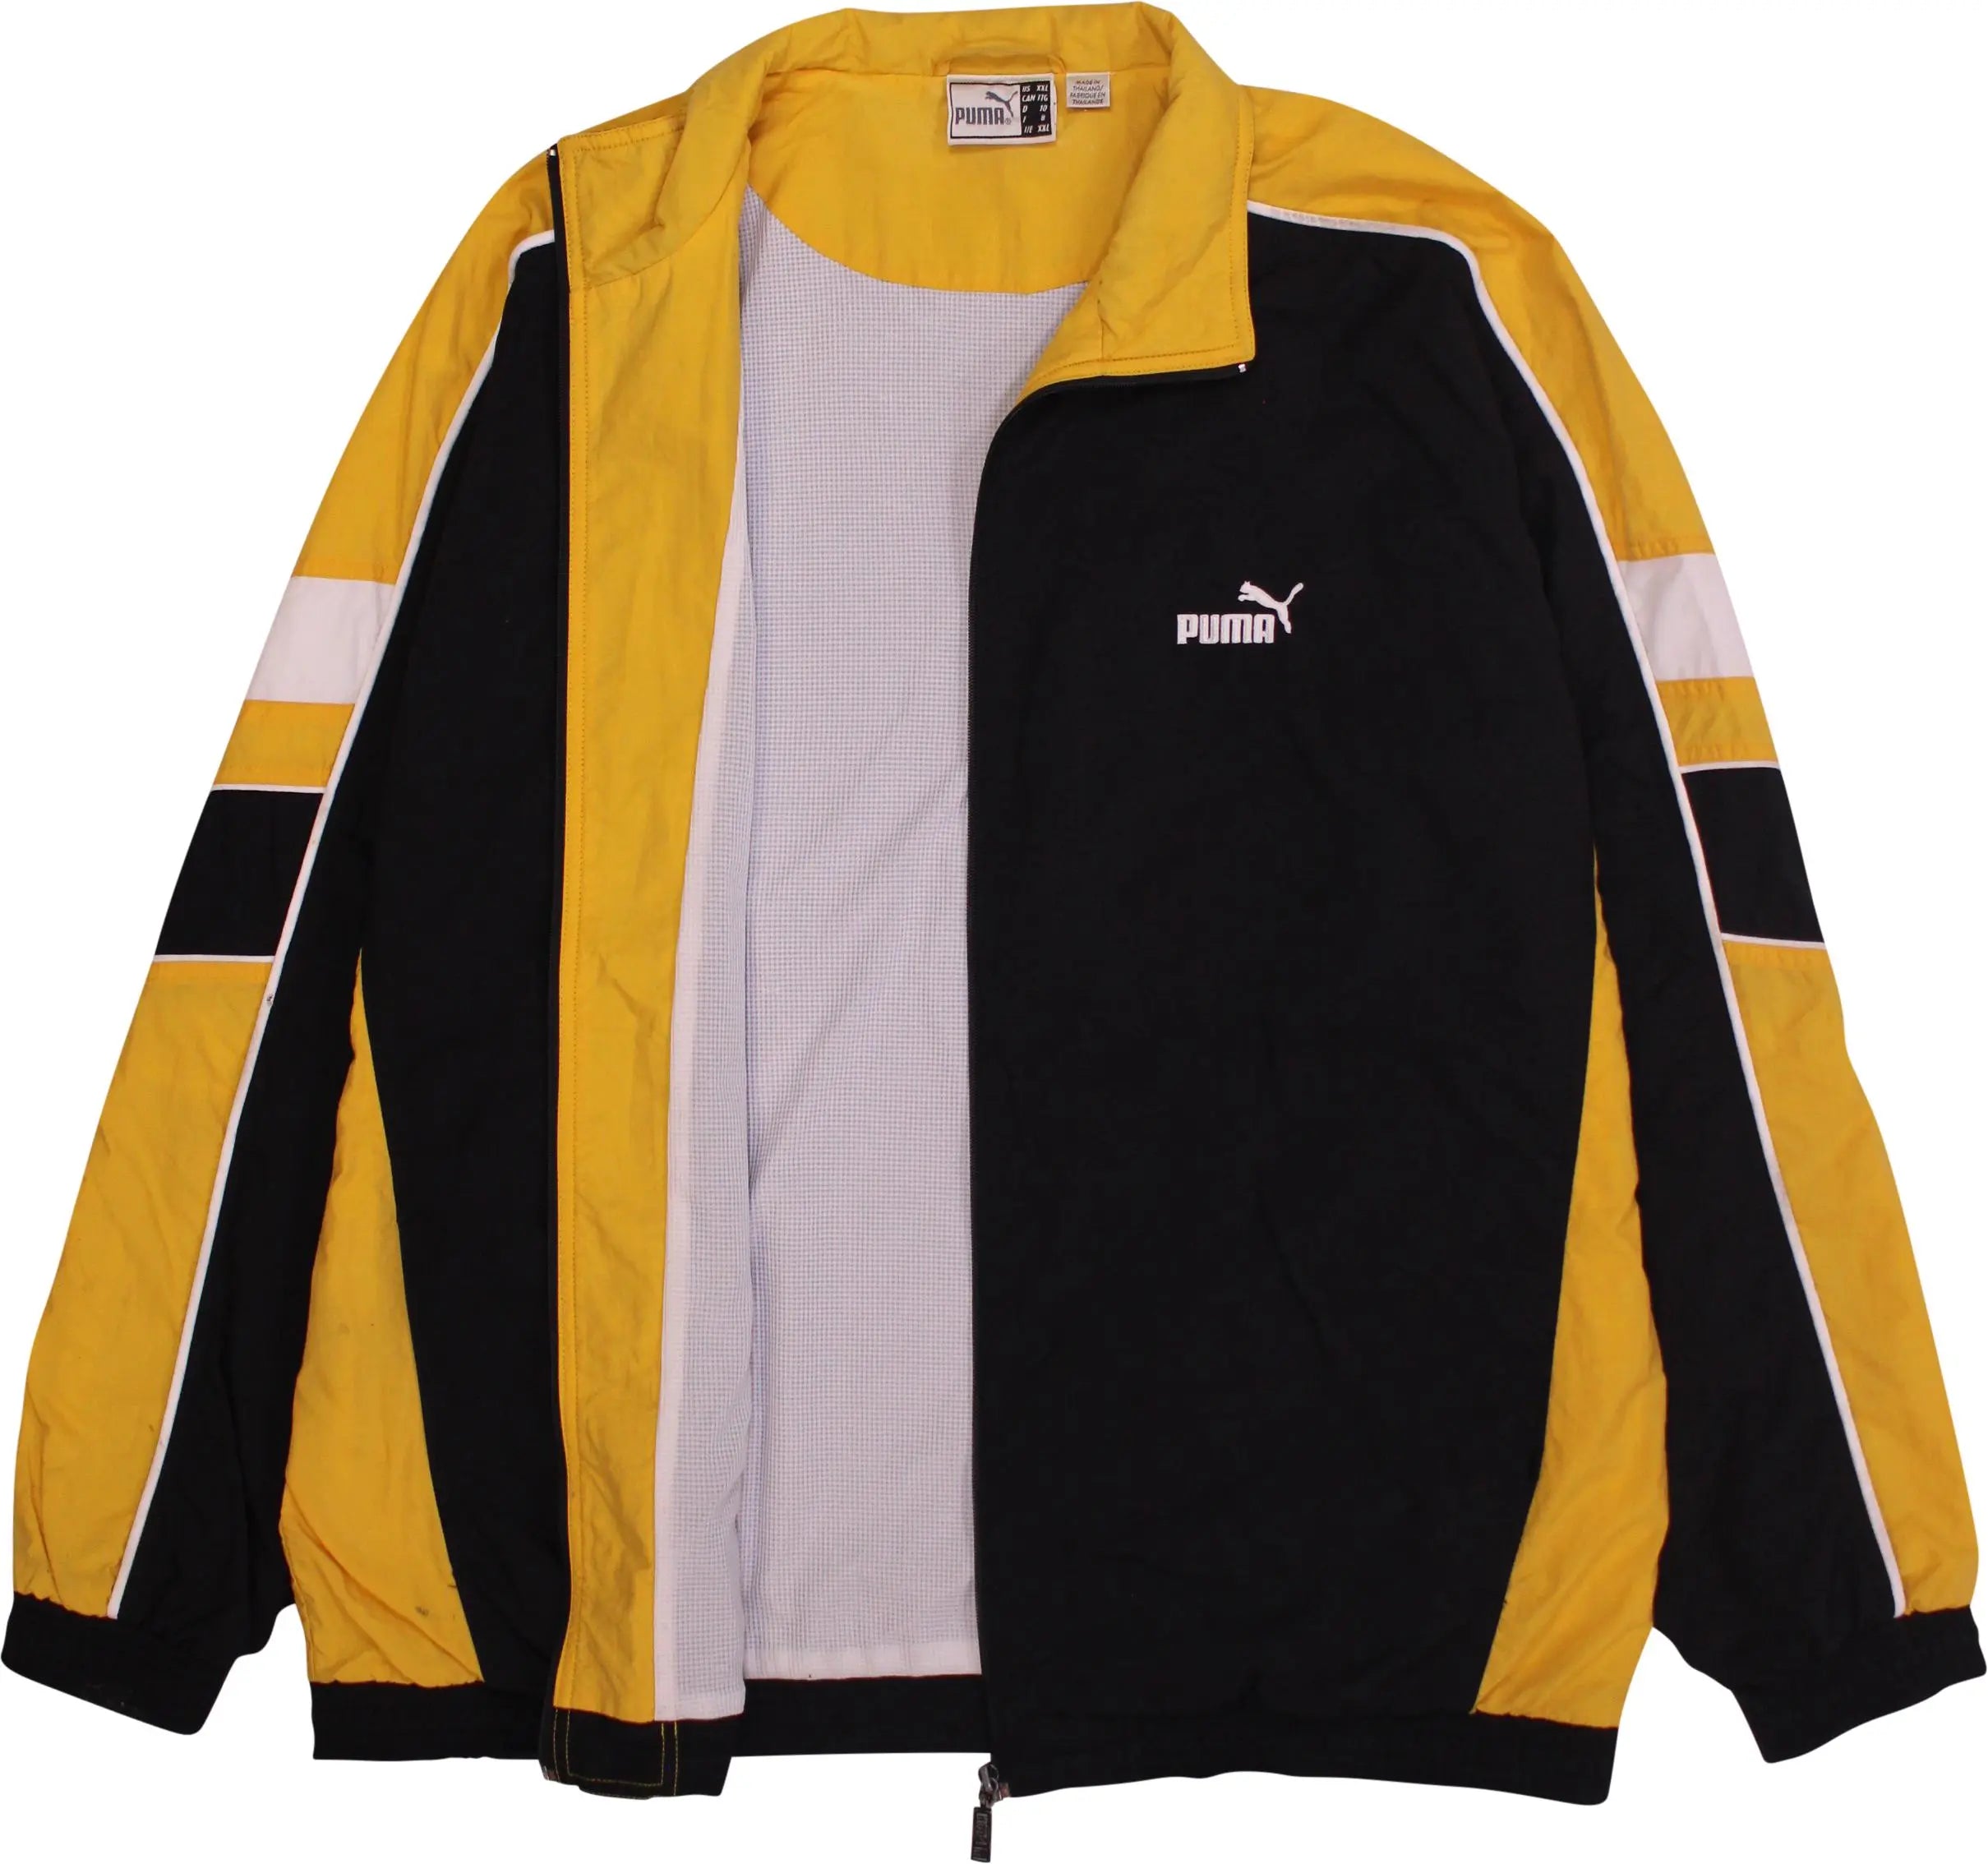 Puma - Yellow Black Track Jacket by Puma- ThriftTale.com - Vintage and second handclothing